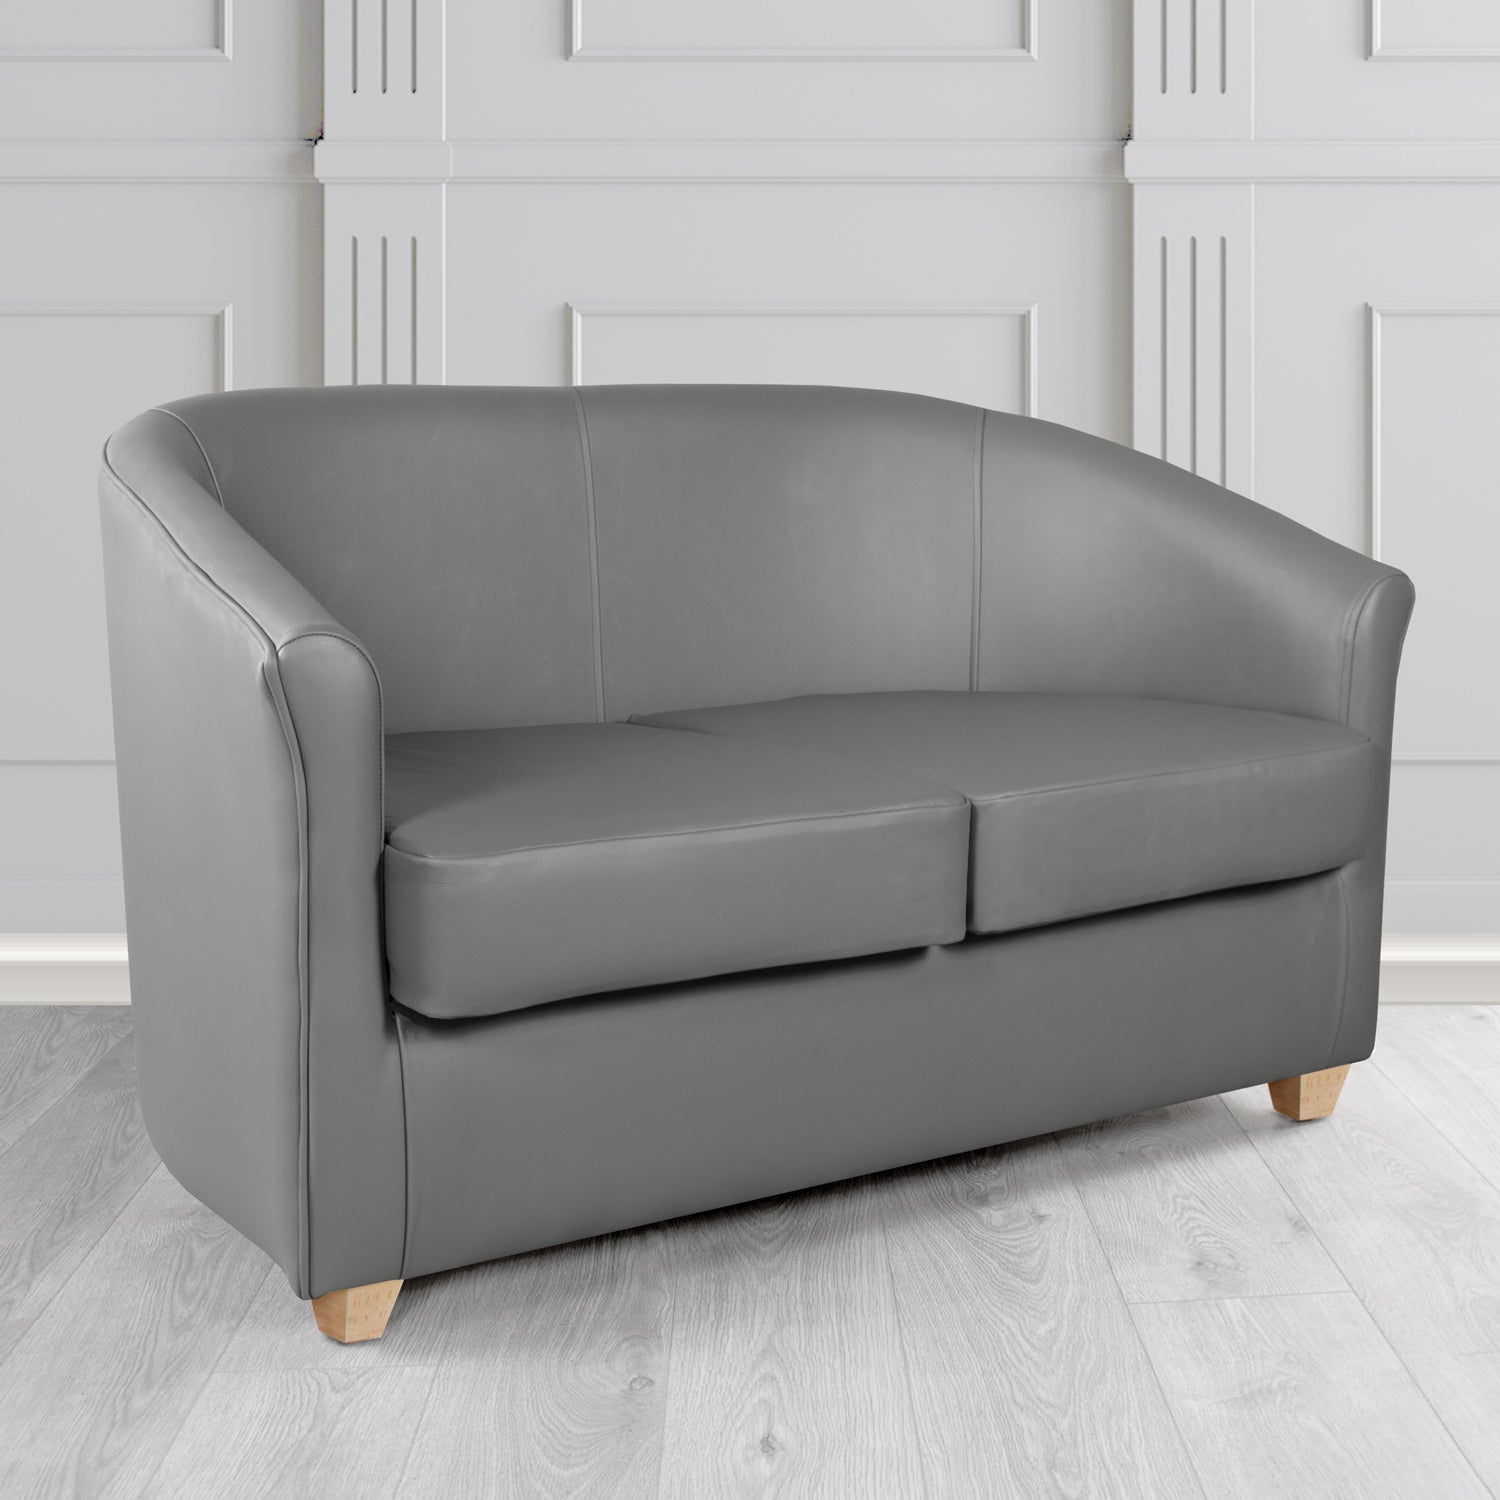 Cannes 2 Seater Tub Sofa in Just Colour Greyfriar Crib 5 Faux Leather - The Tub Chair Shop